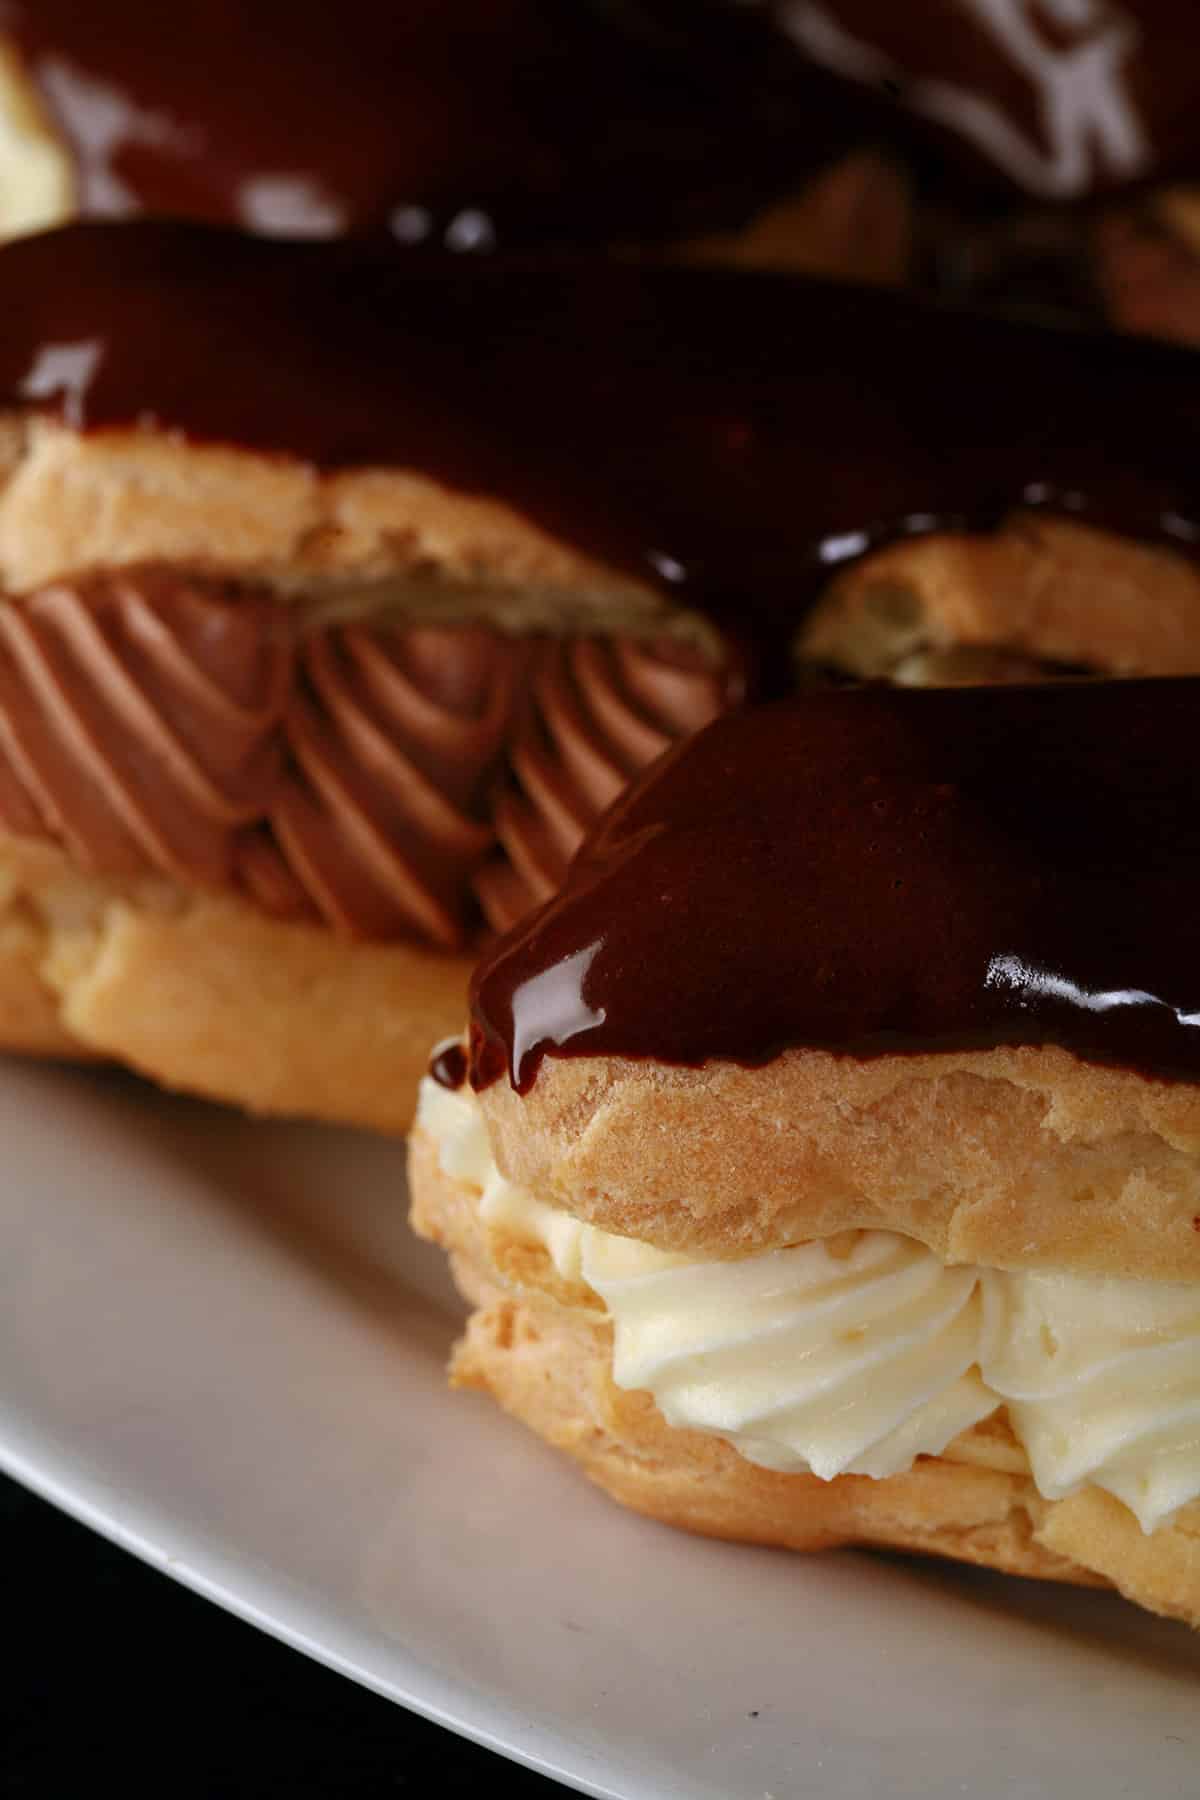 Several chocolate eclairs on a plate, with chocolate and vanilla cream fillings.